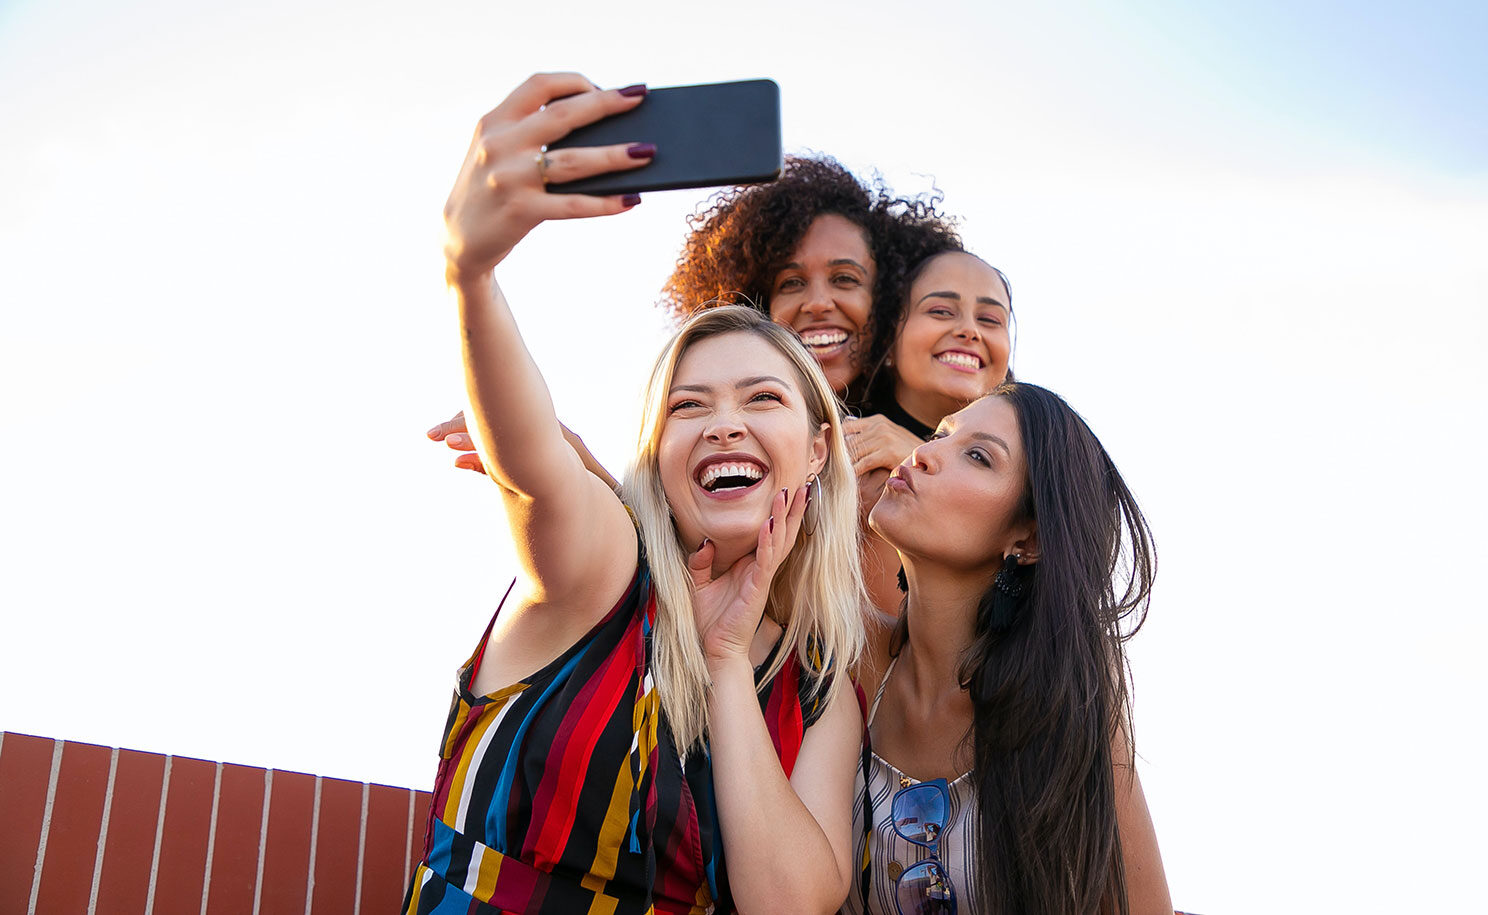 An extroverted HSP takes a selfie with friends